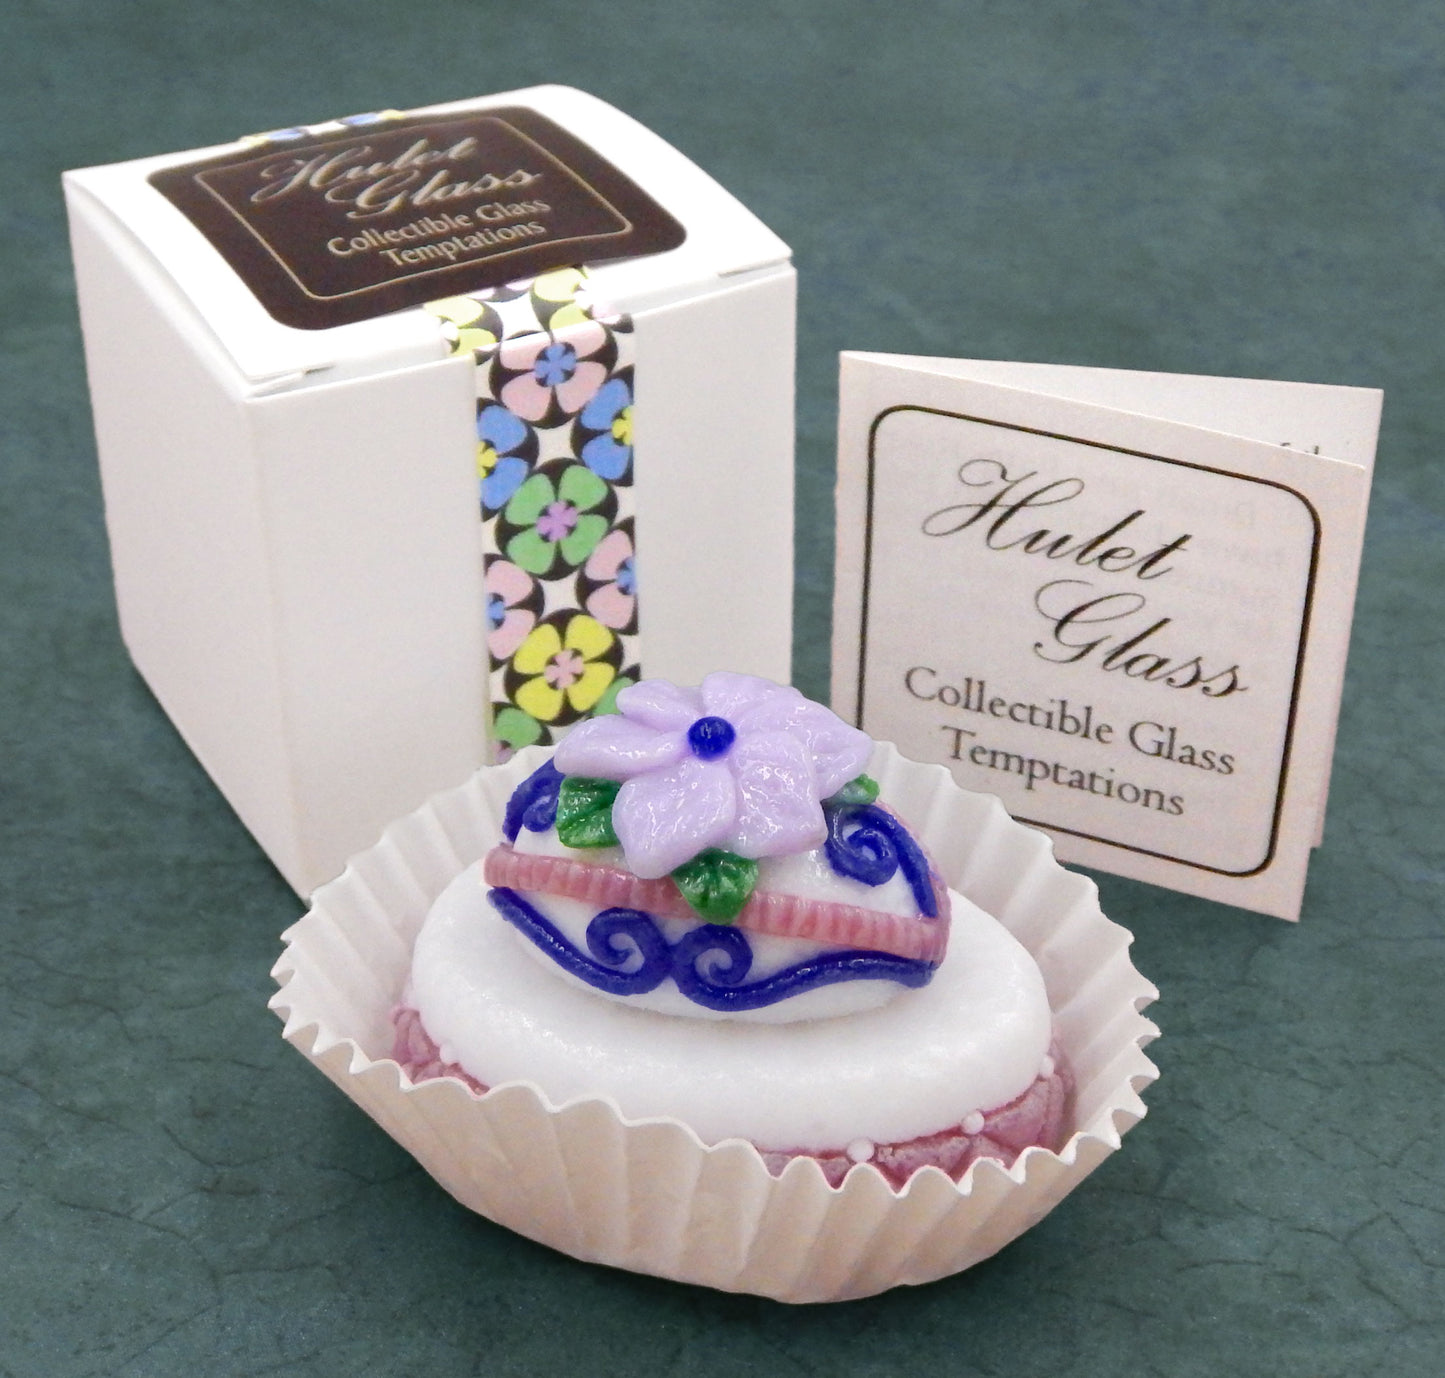 Easter Egg Petit Four with Flower (84-102)